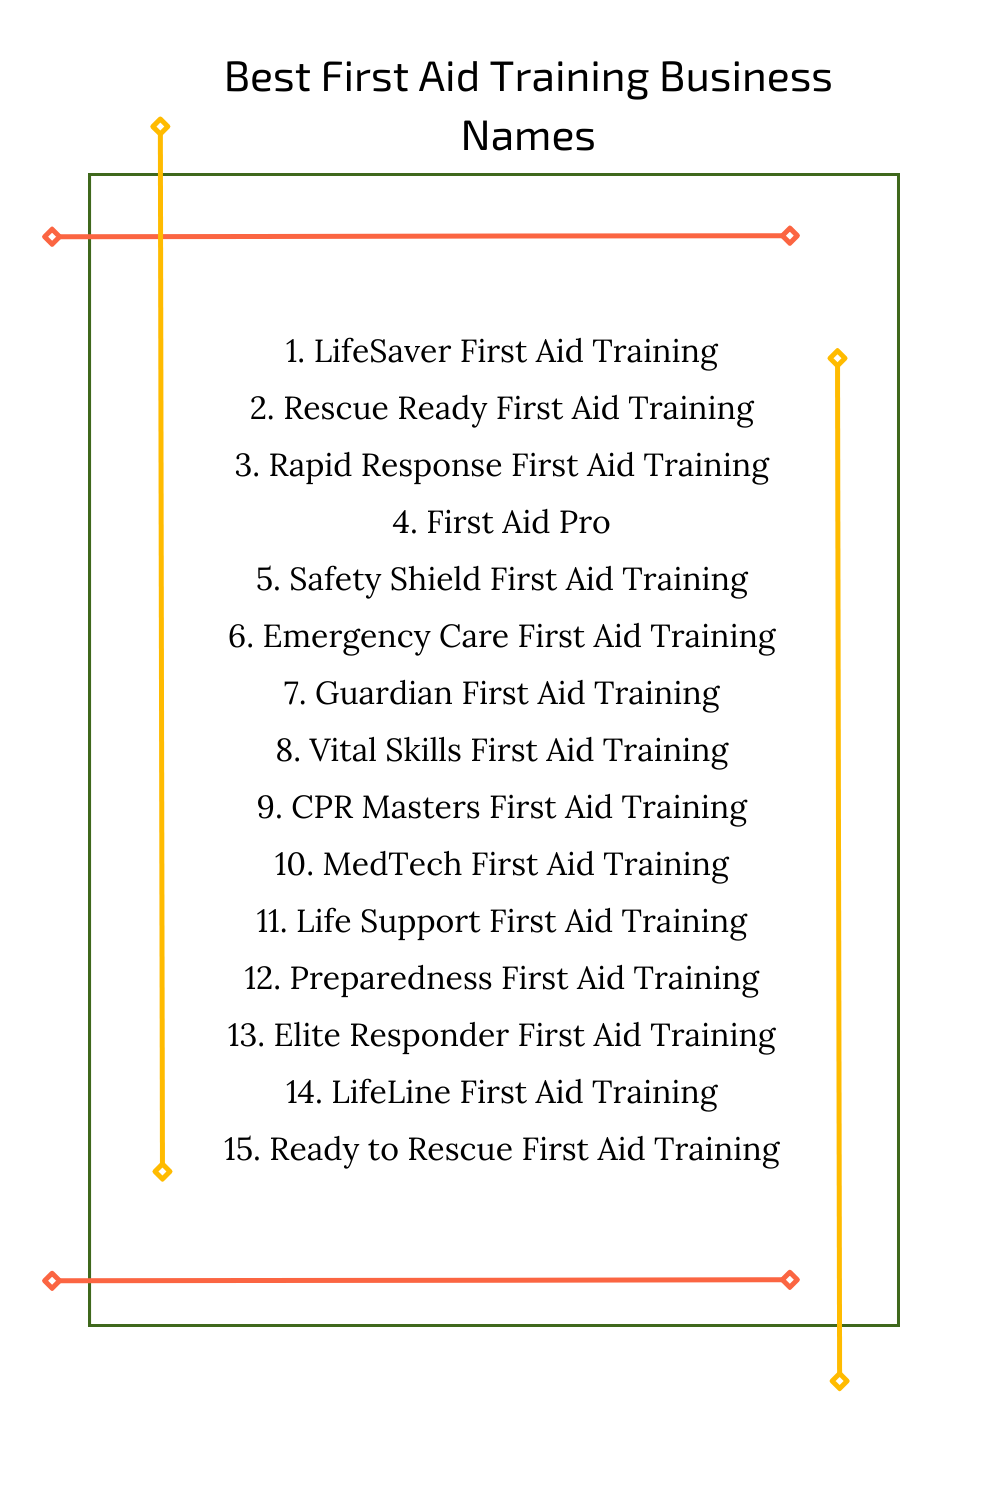 Best First Aid Training Business Names